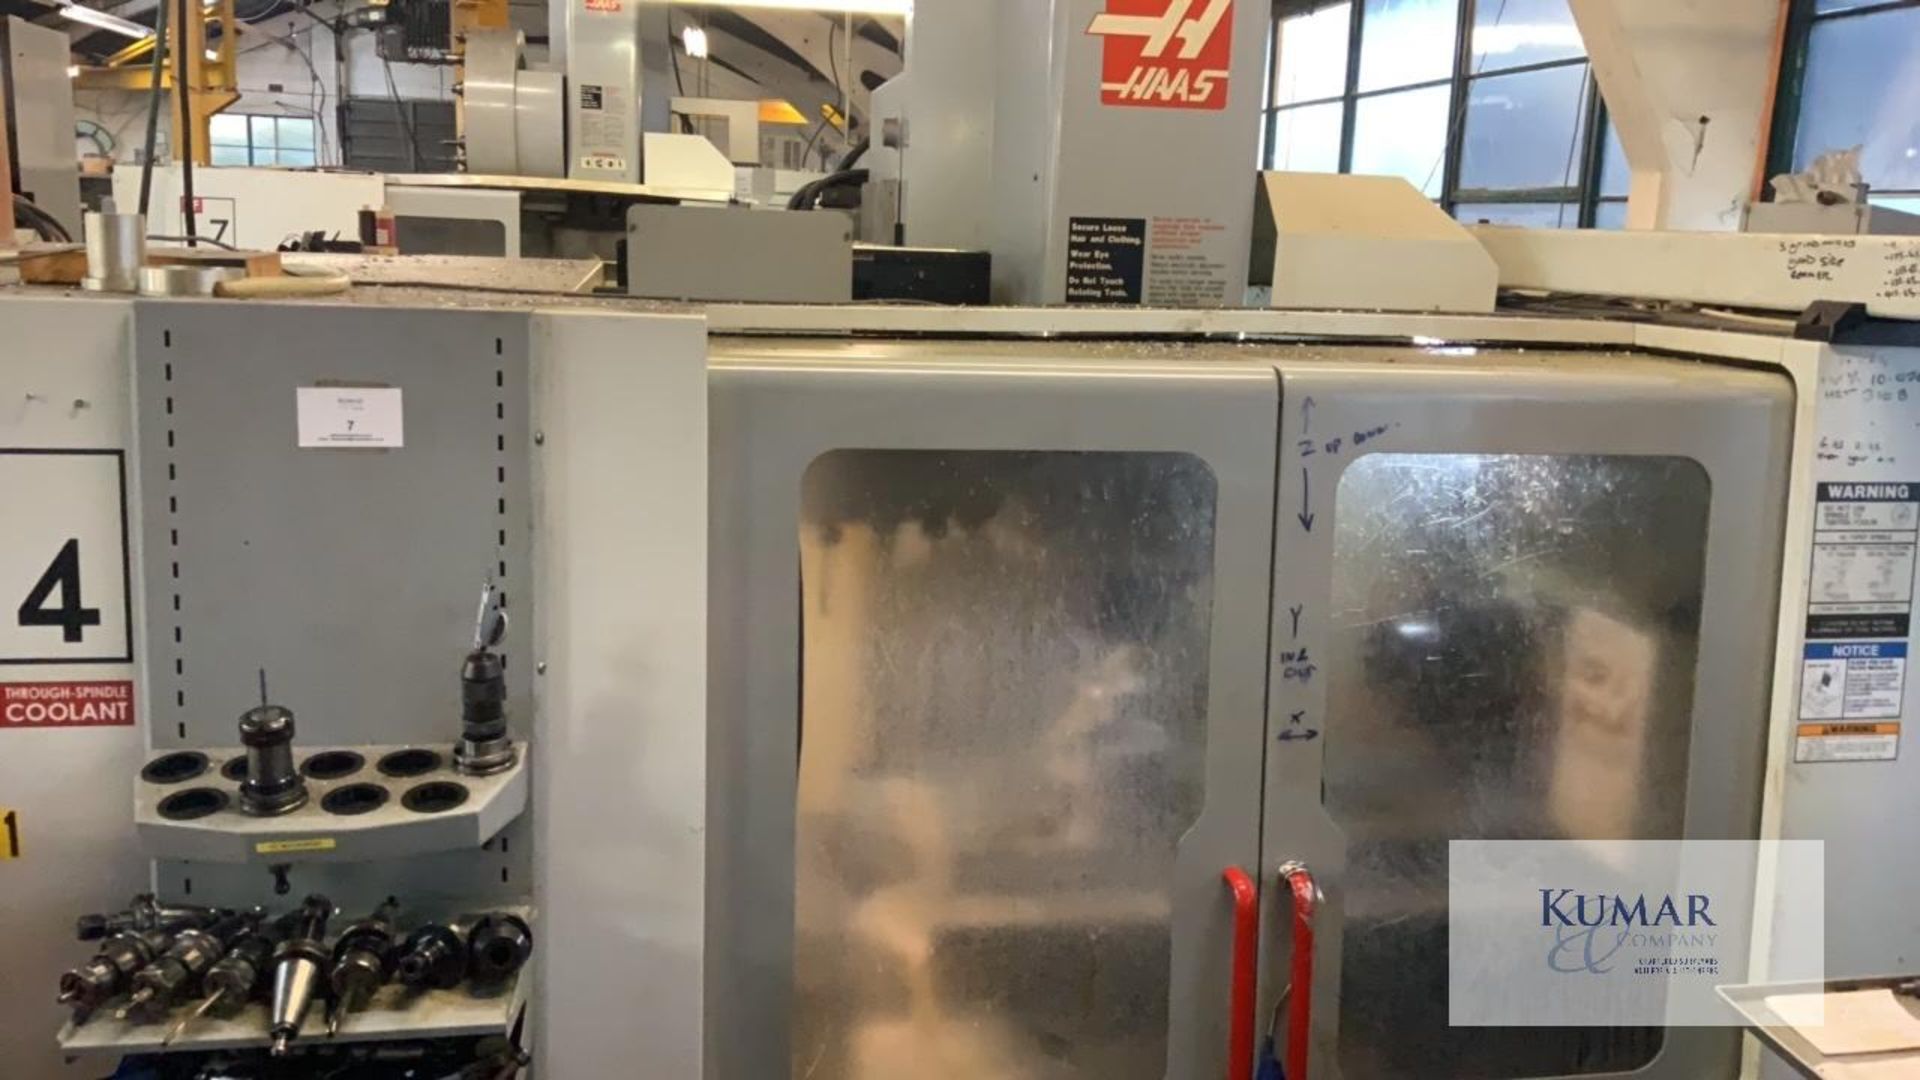 Haas Model VF 4 BHE Vertical Machining Centre, Serial No 39223 (12/04) .Machine in operation at time